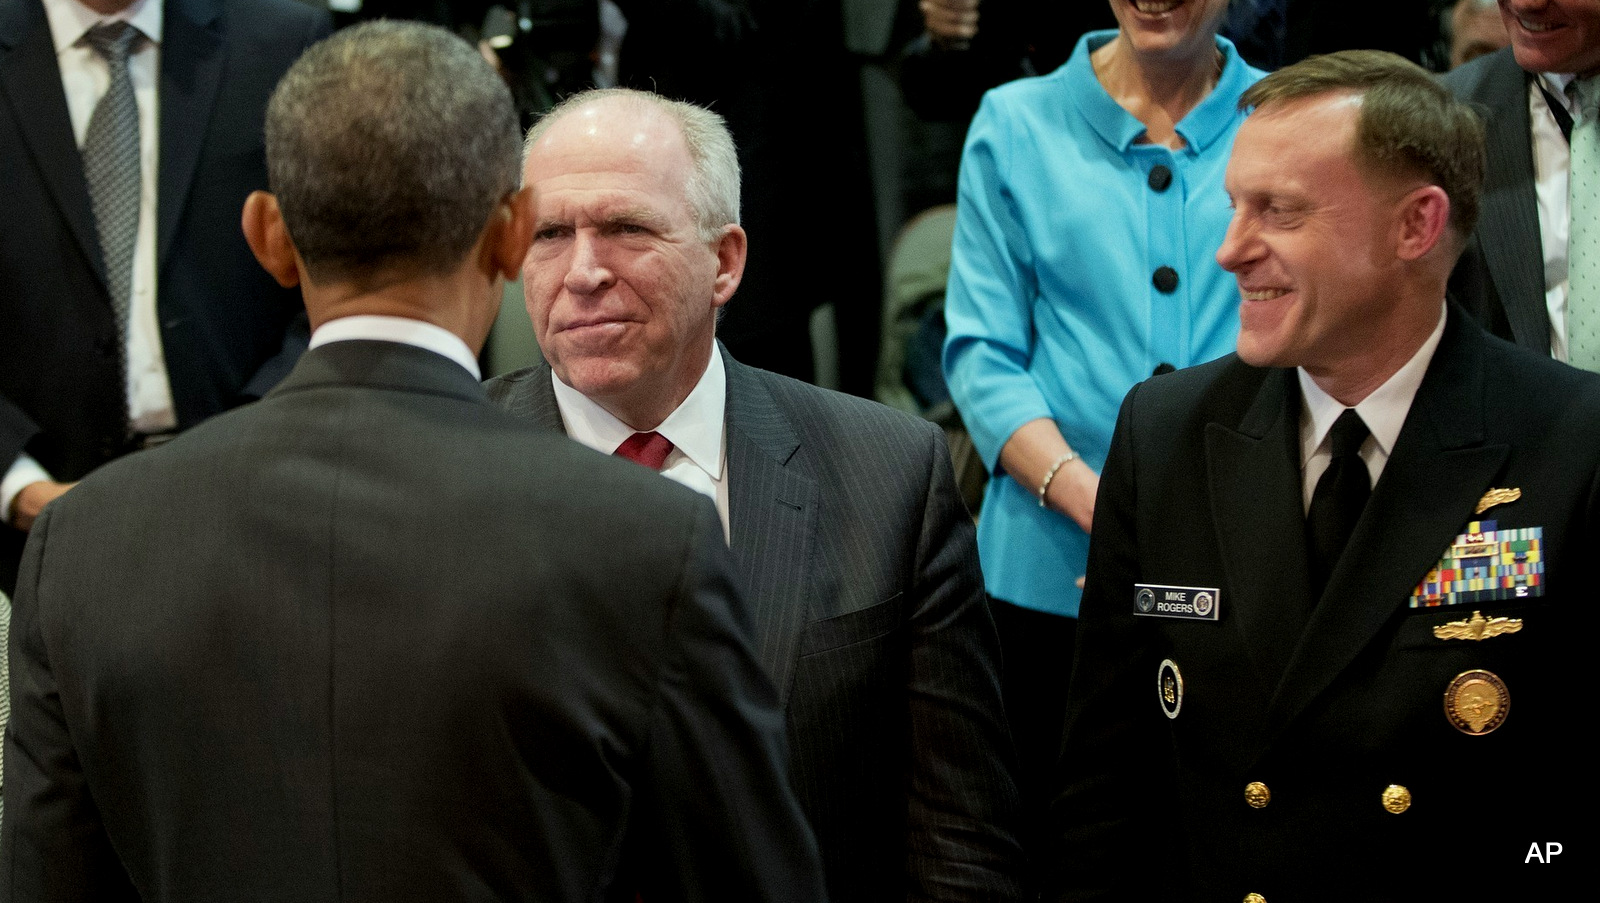 President Obama greets CIA Director John O. Brennan, center, and Navy Adm. Michael S. Rogers, director of the National Security Agency, in McLean, Va., on April 24. 